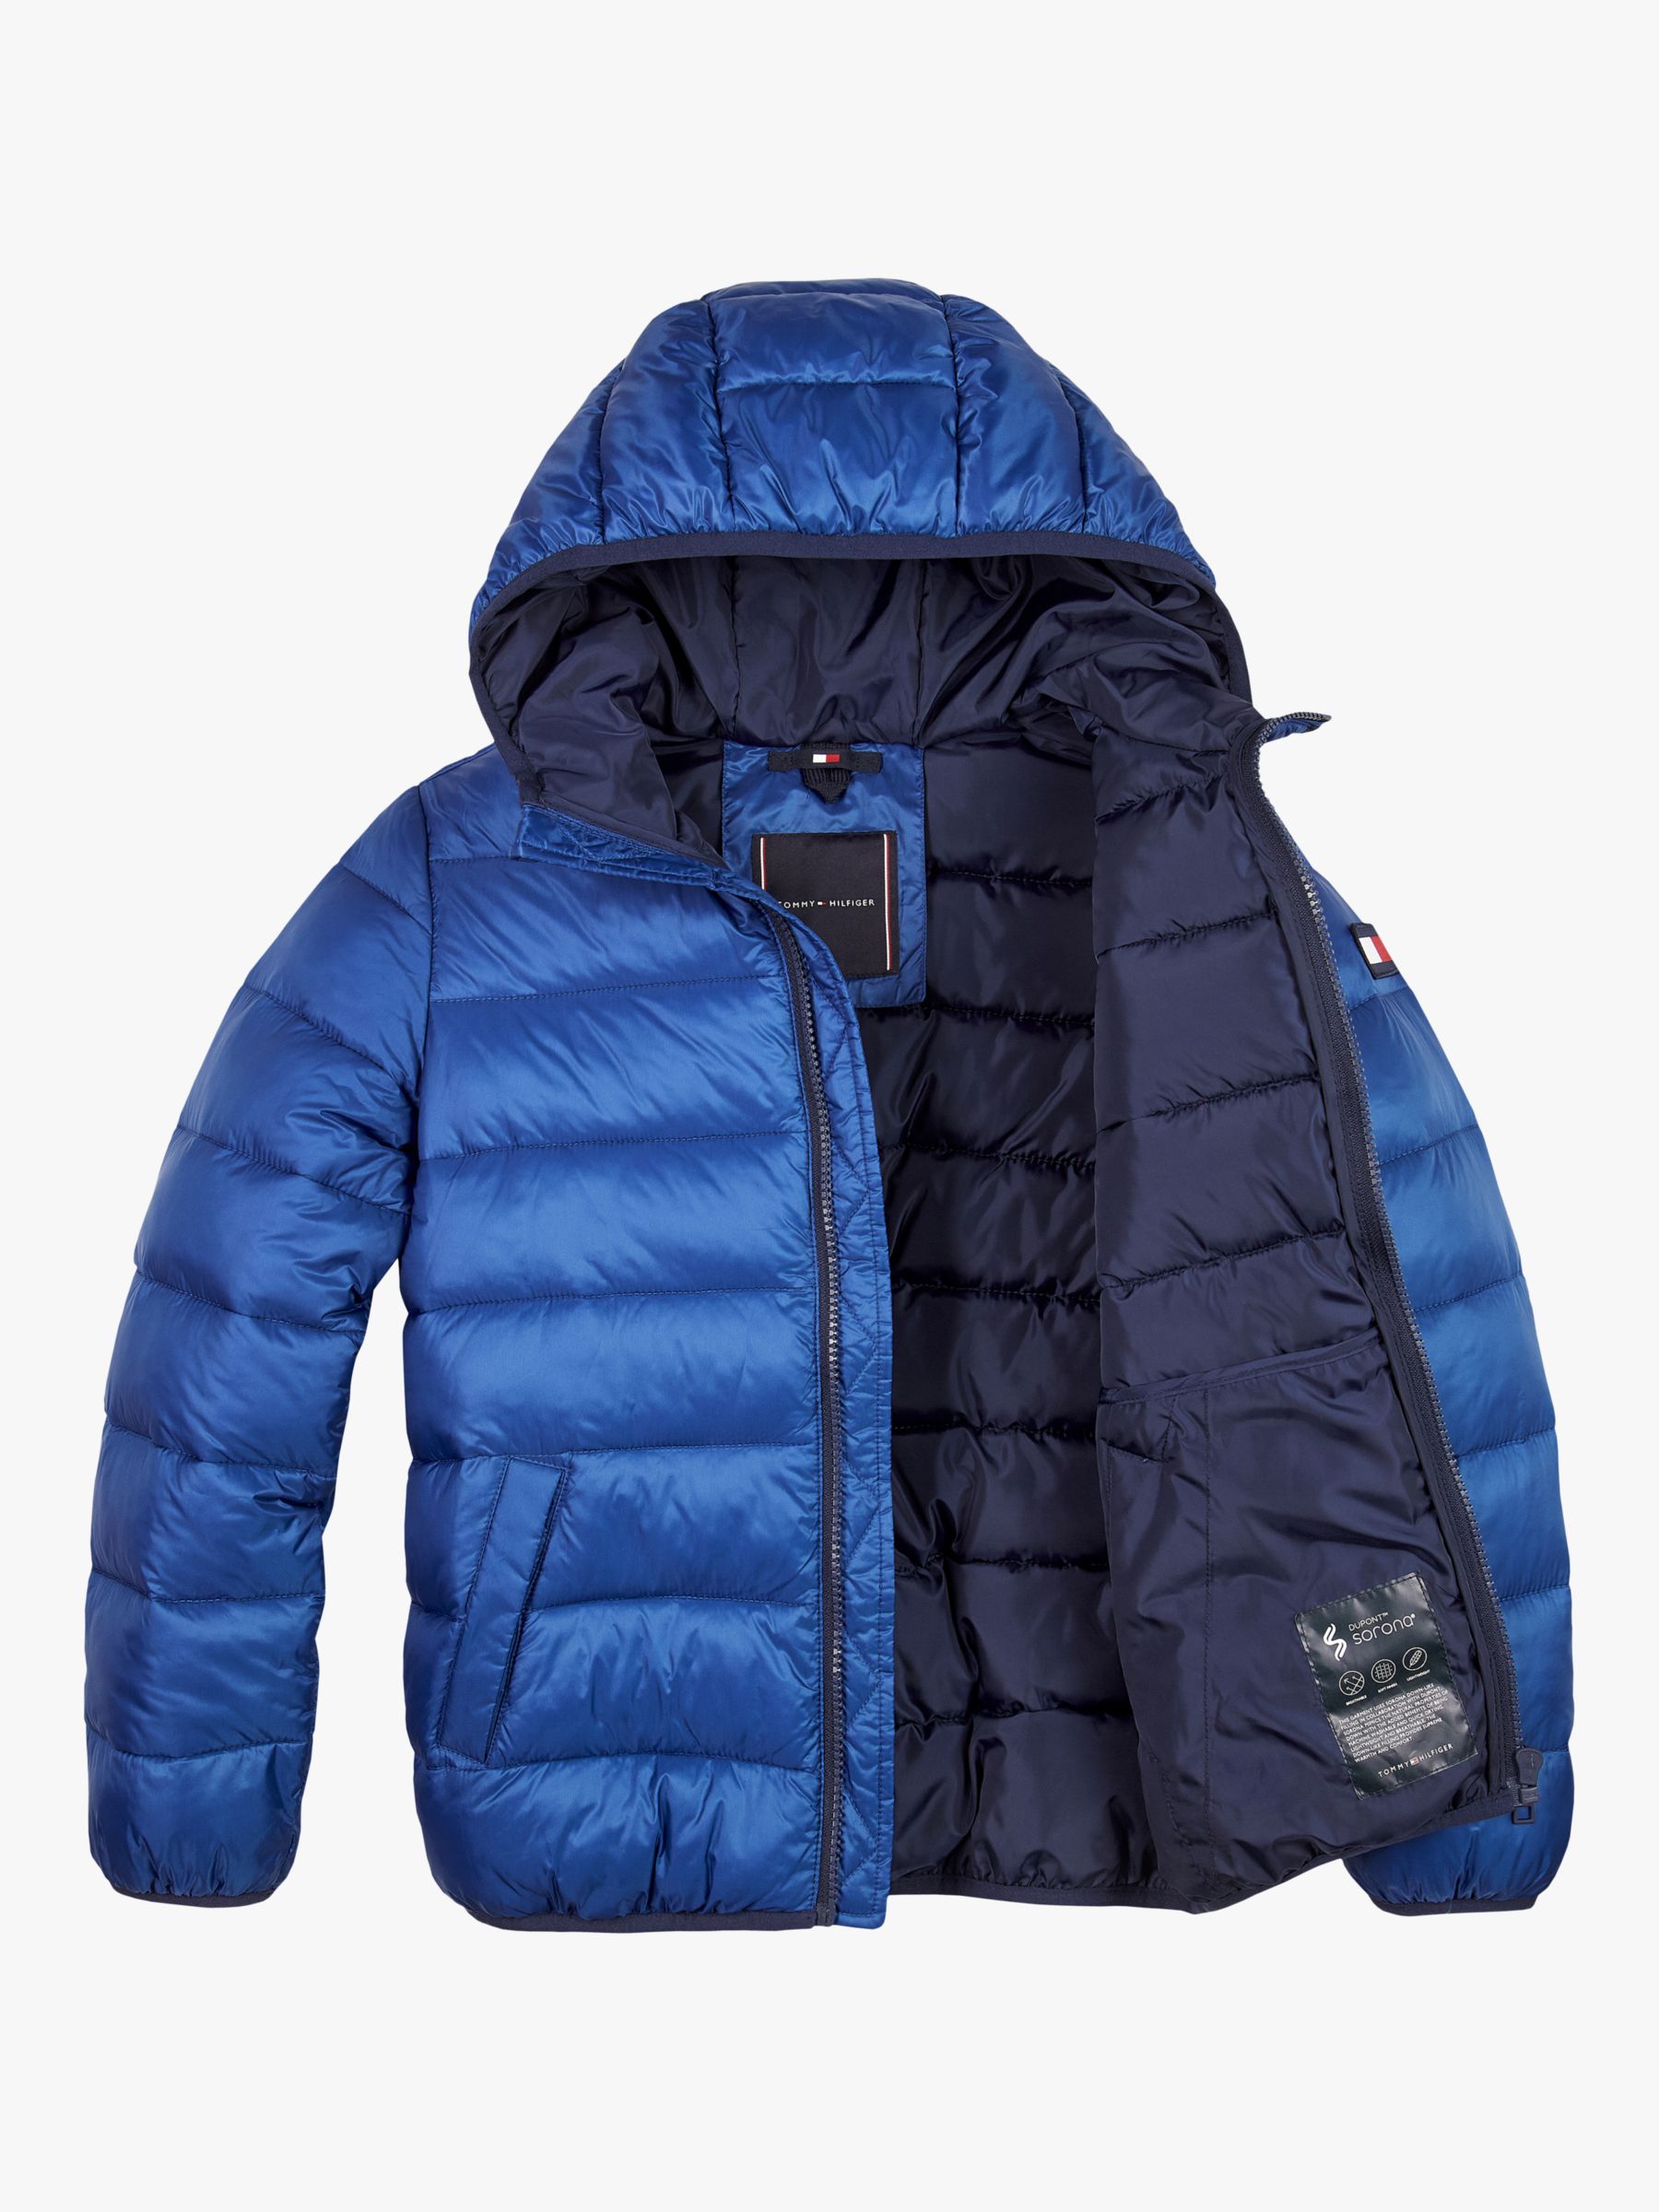 Tommy Hilfiger Boys' Essential Padded Jacket, Navy at John Lewis & Partners